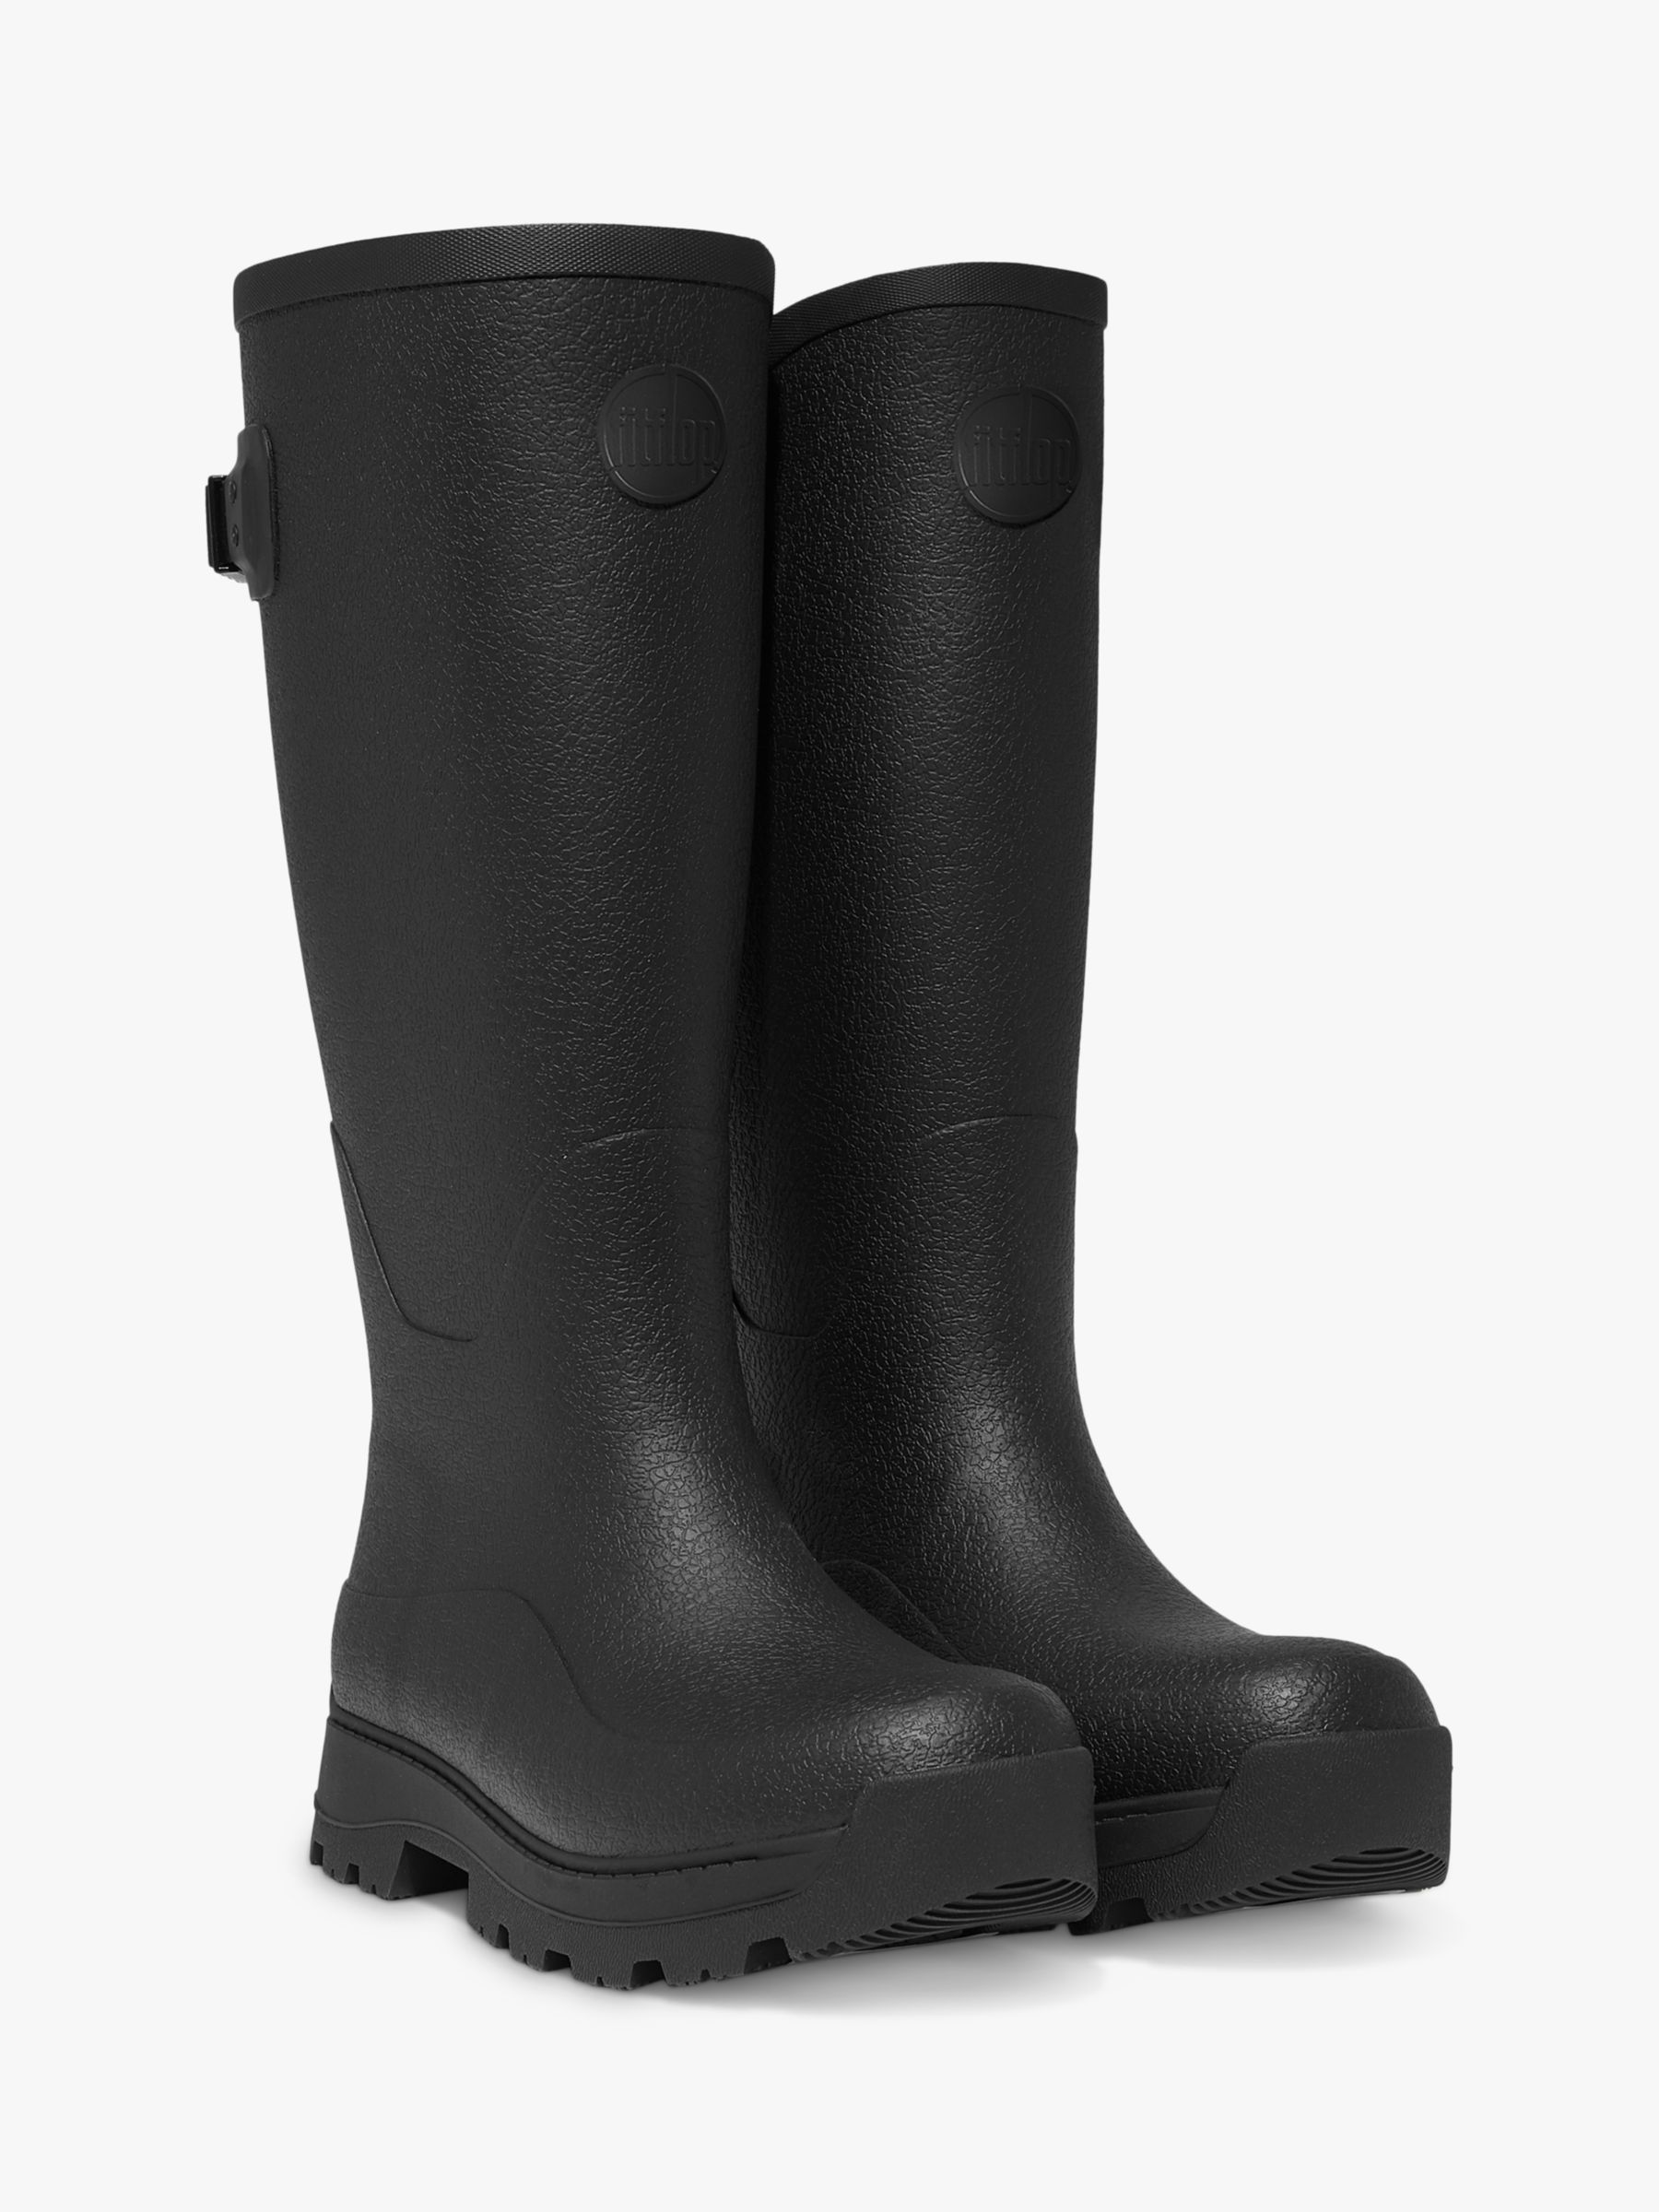 Buy FitFlop Wonderwelly Tall Wellington Boots Online at johnlewis.com